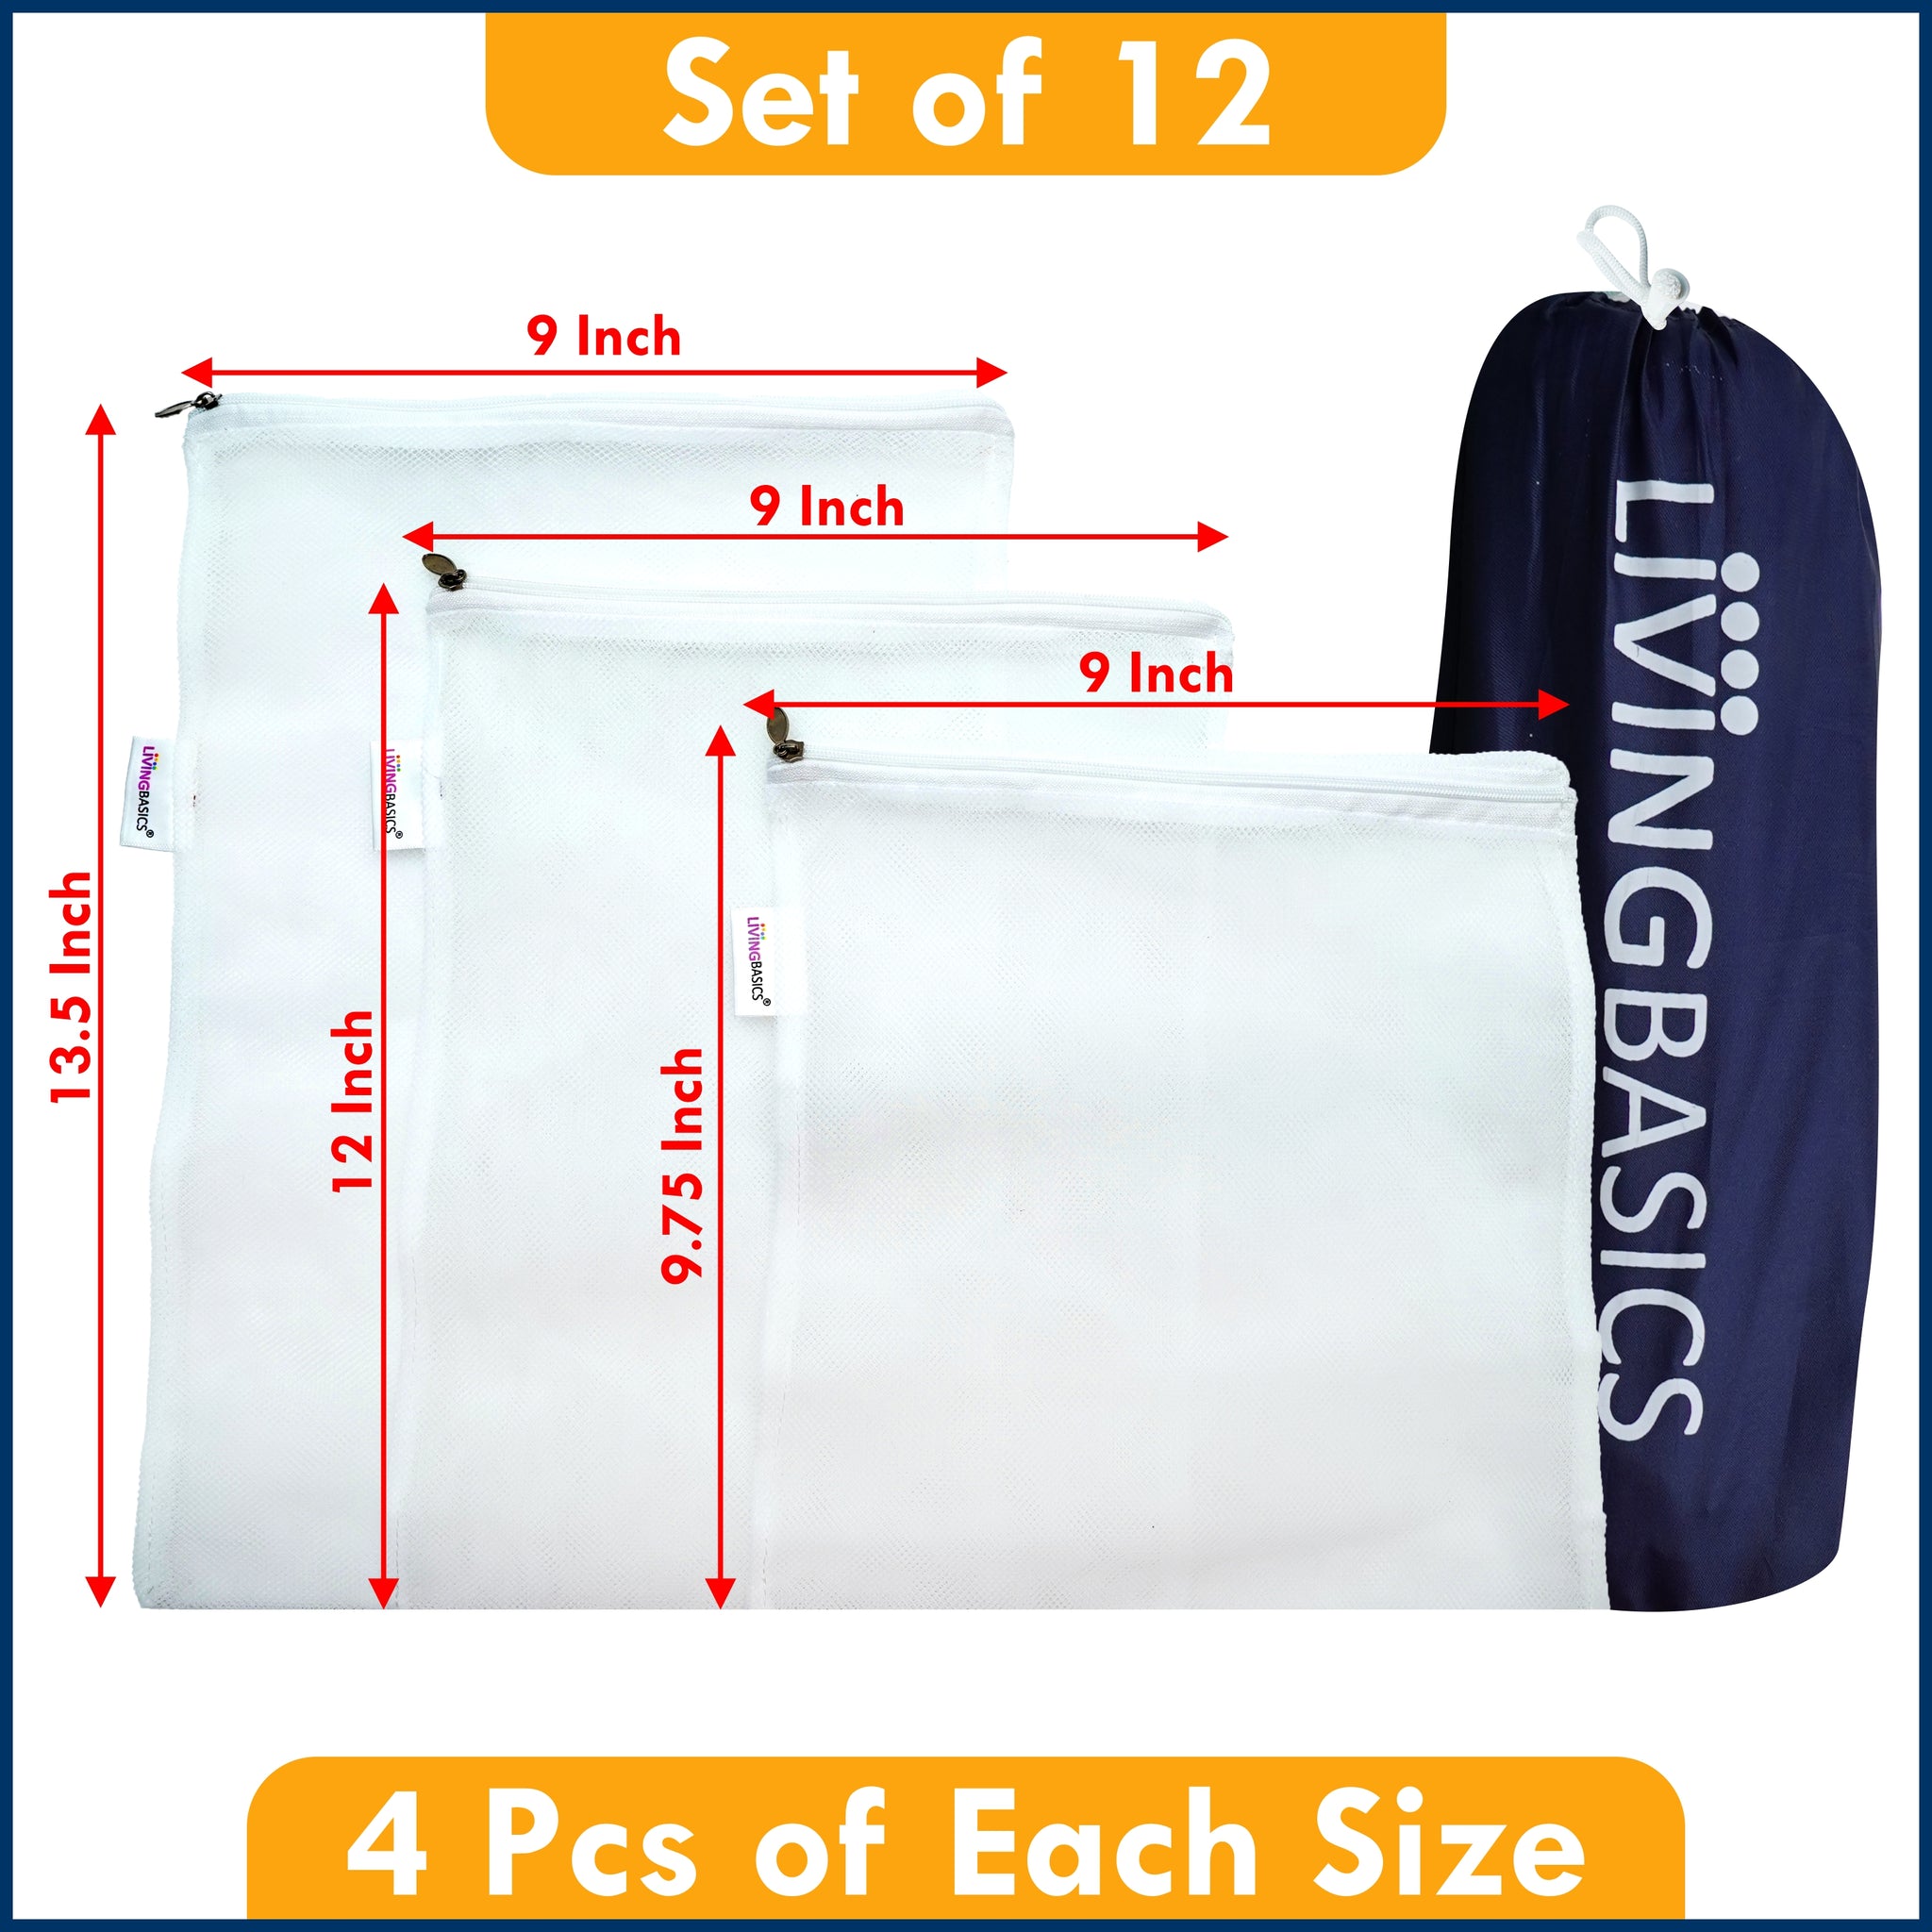 LIVINGBASICS Set of 12 Premium Double Layer Air Circulating Reusable Fridge / Refrigerator Bags / Pouches / Packs for Vegetables and Fruits Having Zip With Storage Bag (4 Large, 4 Medium and 4 Small Size)